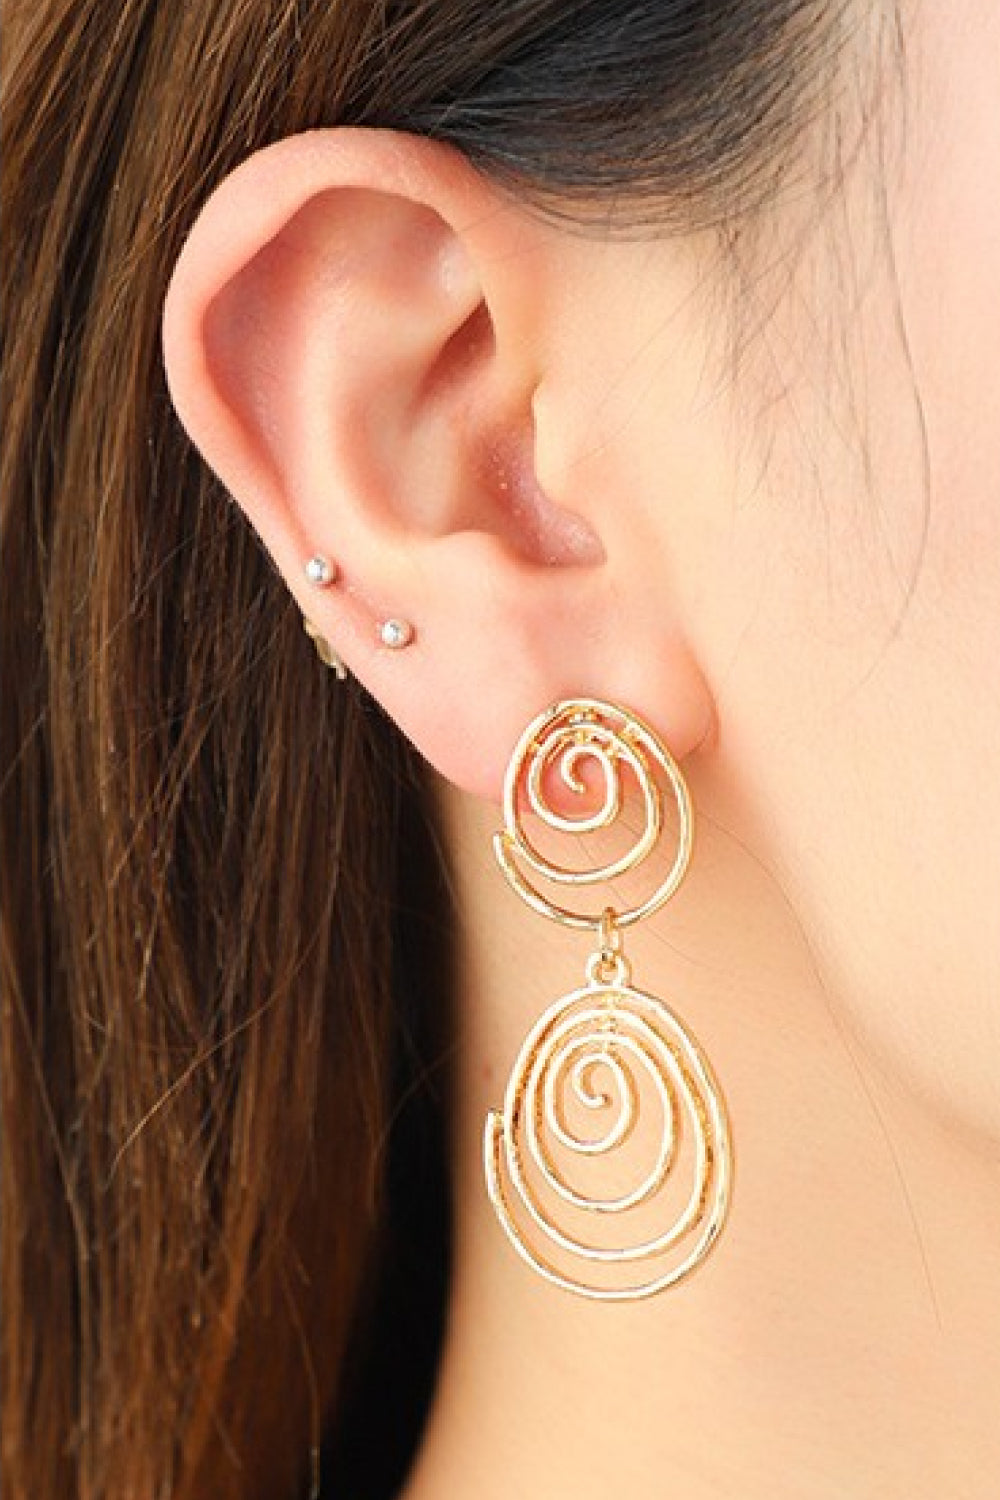 Navajo White 18K Gold-Plated Alloy Spiral Earrings Sentient Beauty Fashions